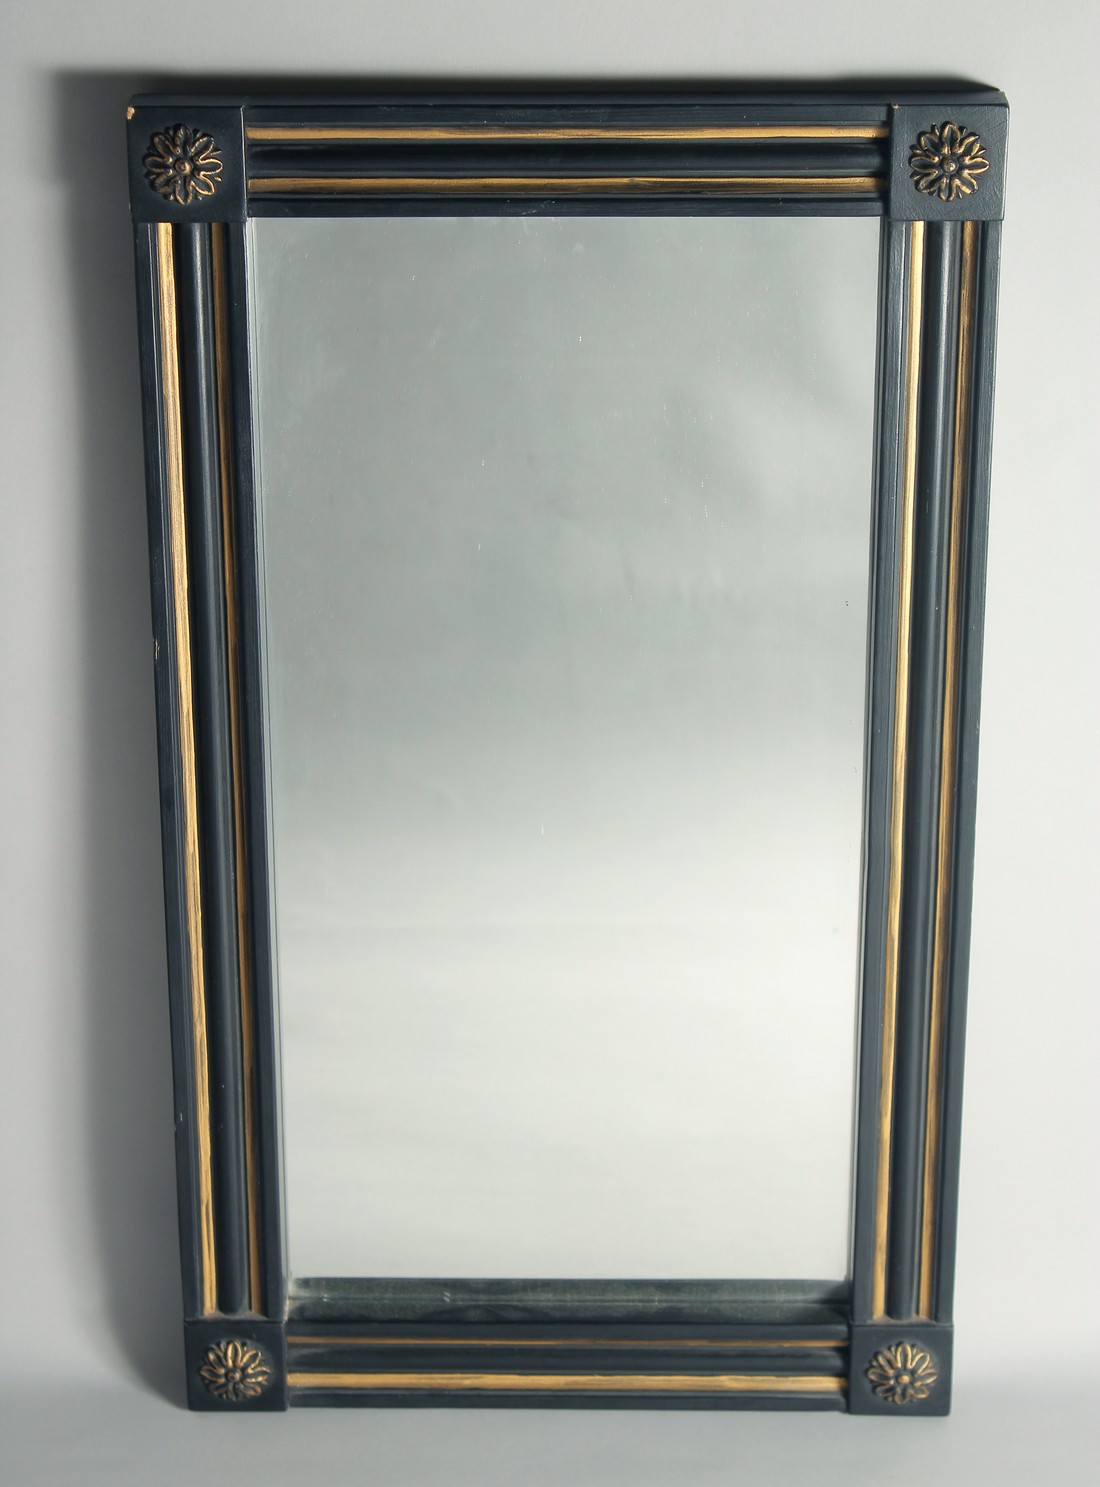 A GOTHIC DESIGN BLACK AND GILT UPRIGHT MIRROR. 2ft 7ins high, 1ft 6ins wide.